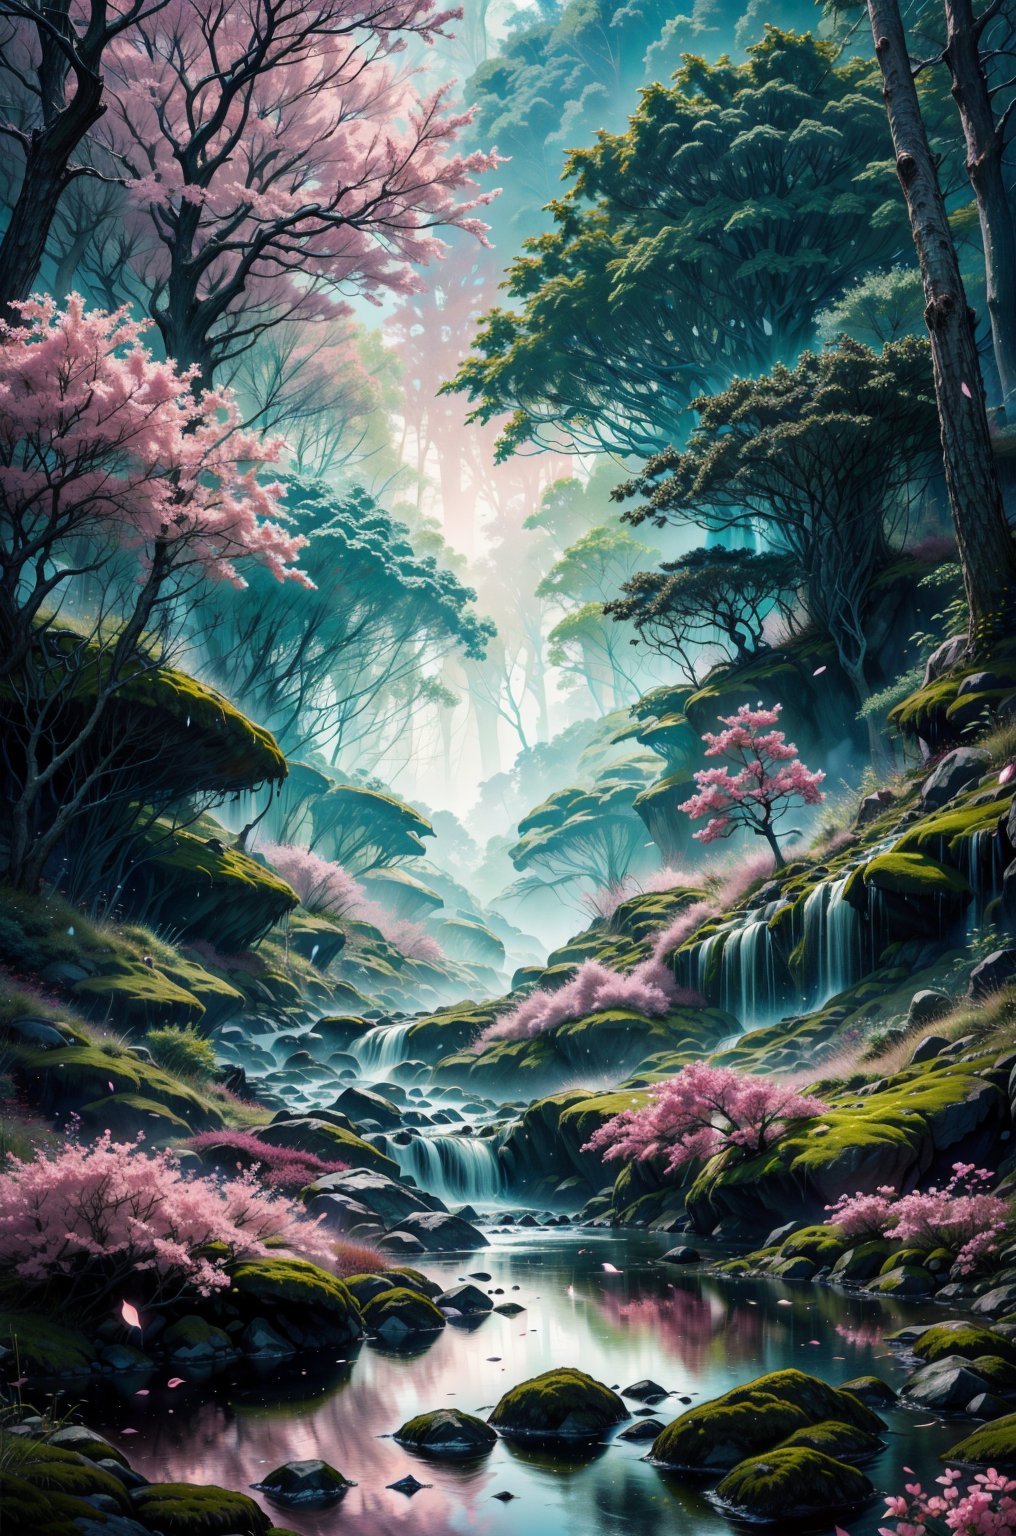 A calm, dark forest at night, illuminated by soft blue light filtering through the trees overhead. A small multi-level mountain stream meanders through the center of the forest, reflecting the heavenly glow on its surface. Delicate pink, yellow and red flowers bloom on either side of the stream, adding color to the monochrome scene. The forest floor is covered with moss and ferns, creating the overall feeling of a mystical, enchanted forest. The moonlight falls dimly on the water, cutting through the silence of the night. An old cherry tree, standing quietly by the water, softly crumbles under the gusts of a weak wind, its pink petals, lifted by a breath of light wind, travel through the forest,DonMD34thM4g1c,nhaythoaty,fantasy00d